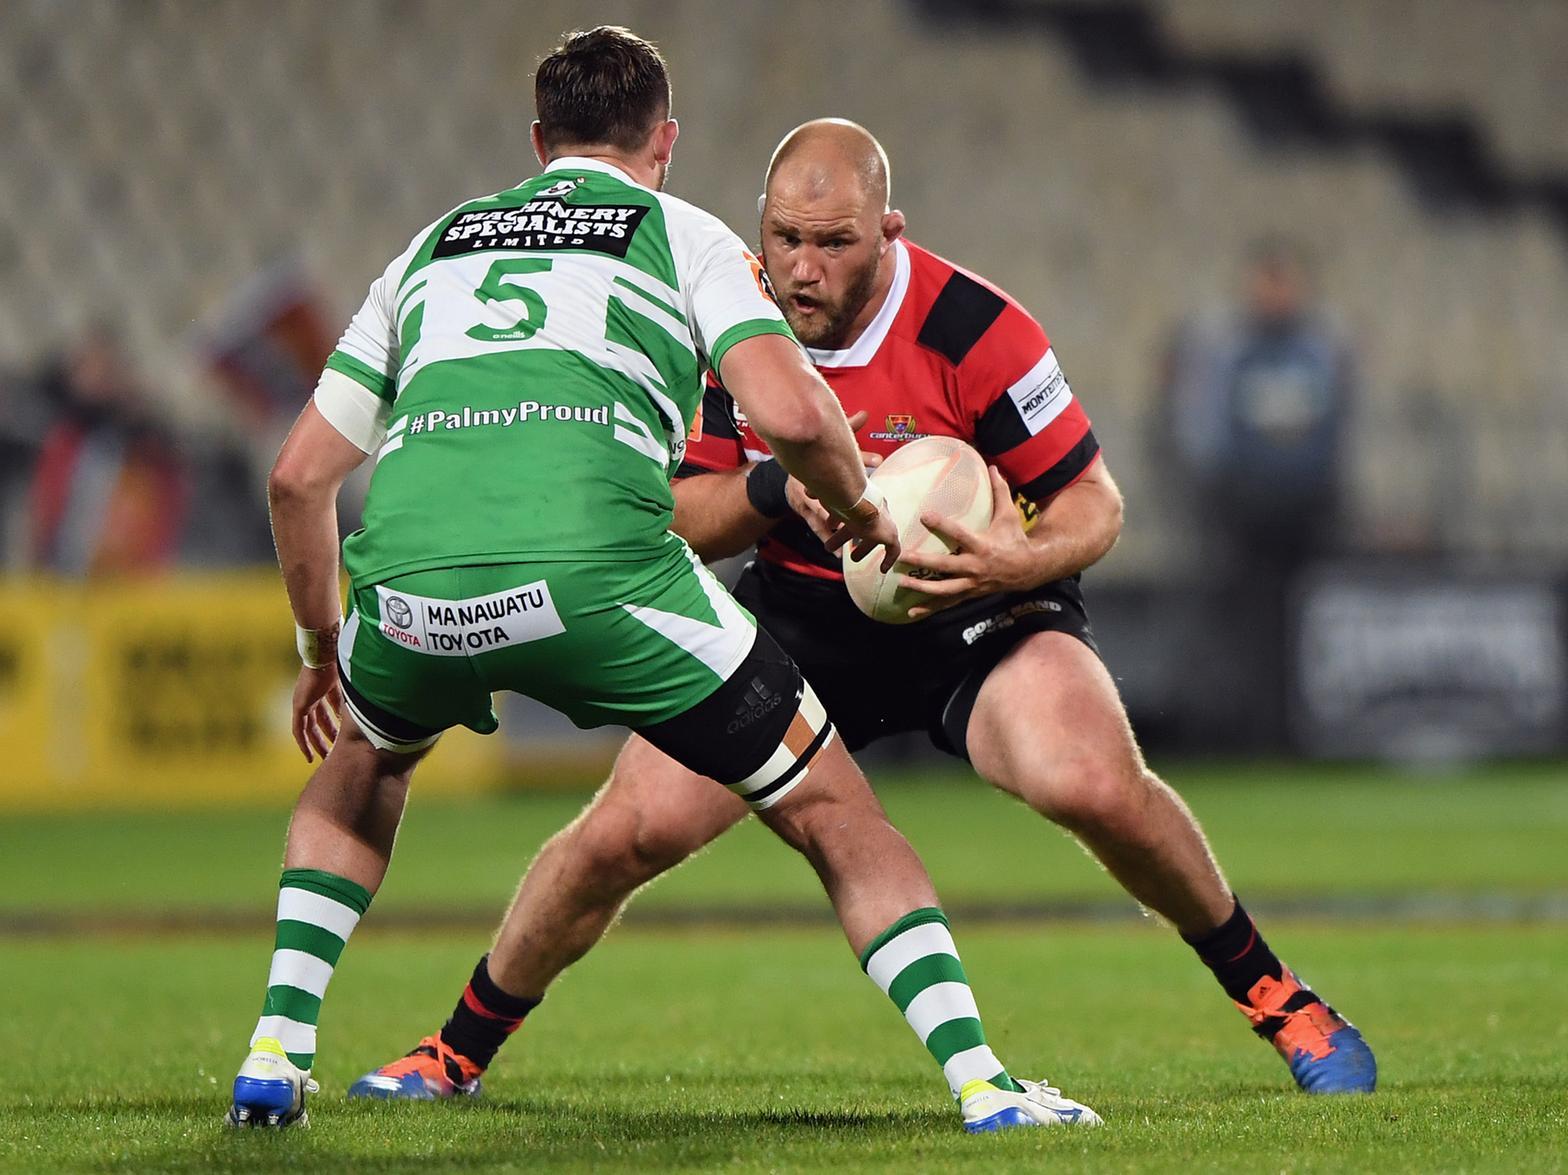 The experienced New Zealand prop arrived at Saints last week and is now available for selection